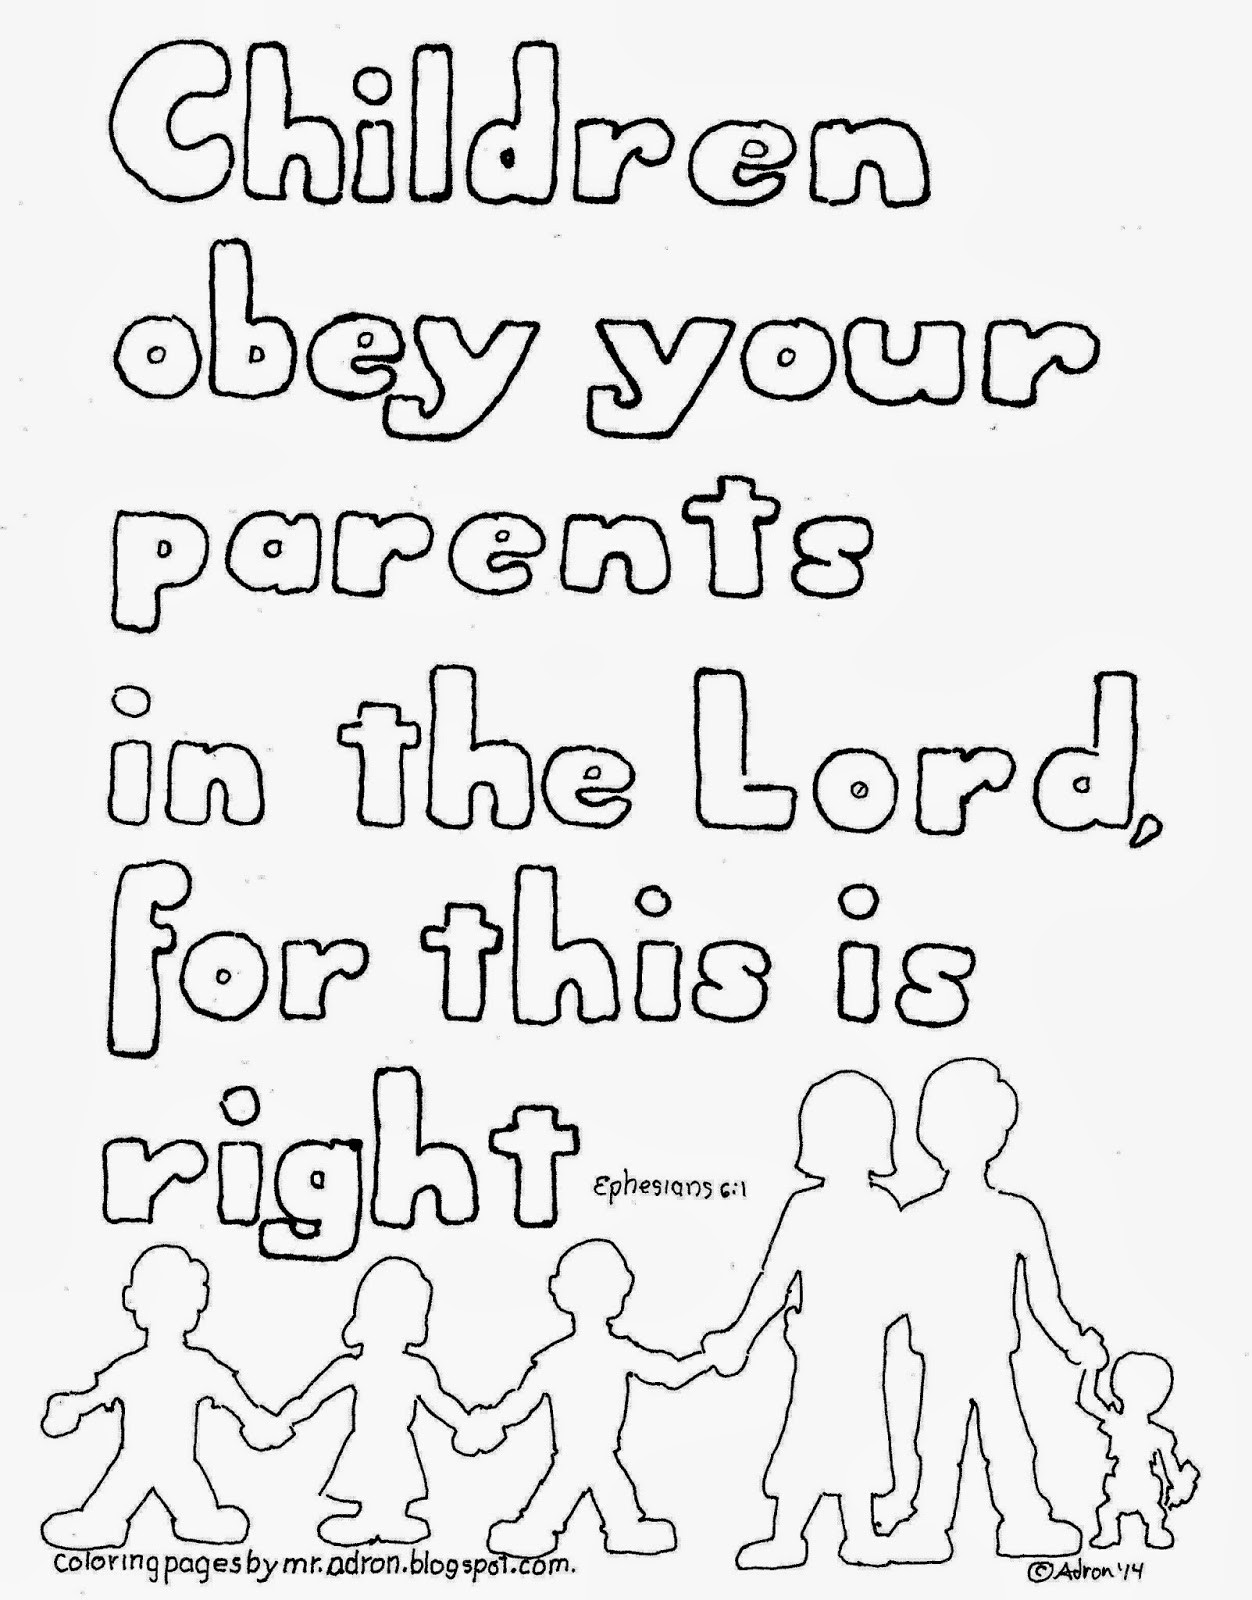 Children Obey Your Parents Coloring Page
 Coloring Pages for Kids by Mr Adron January 2014